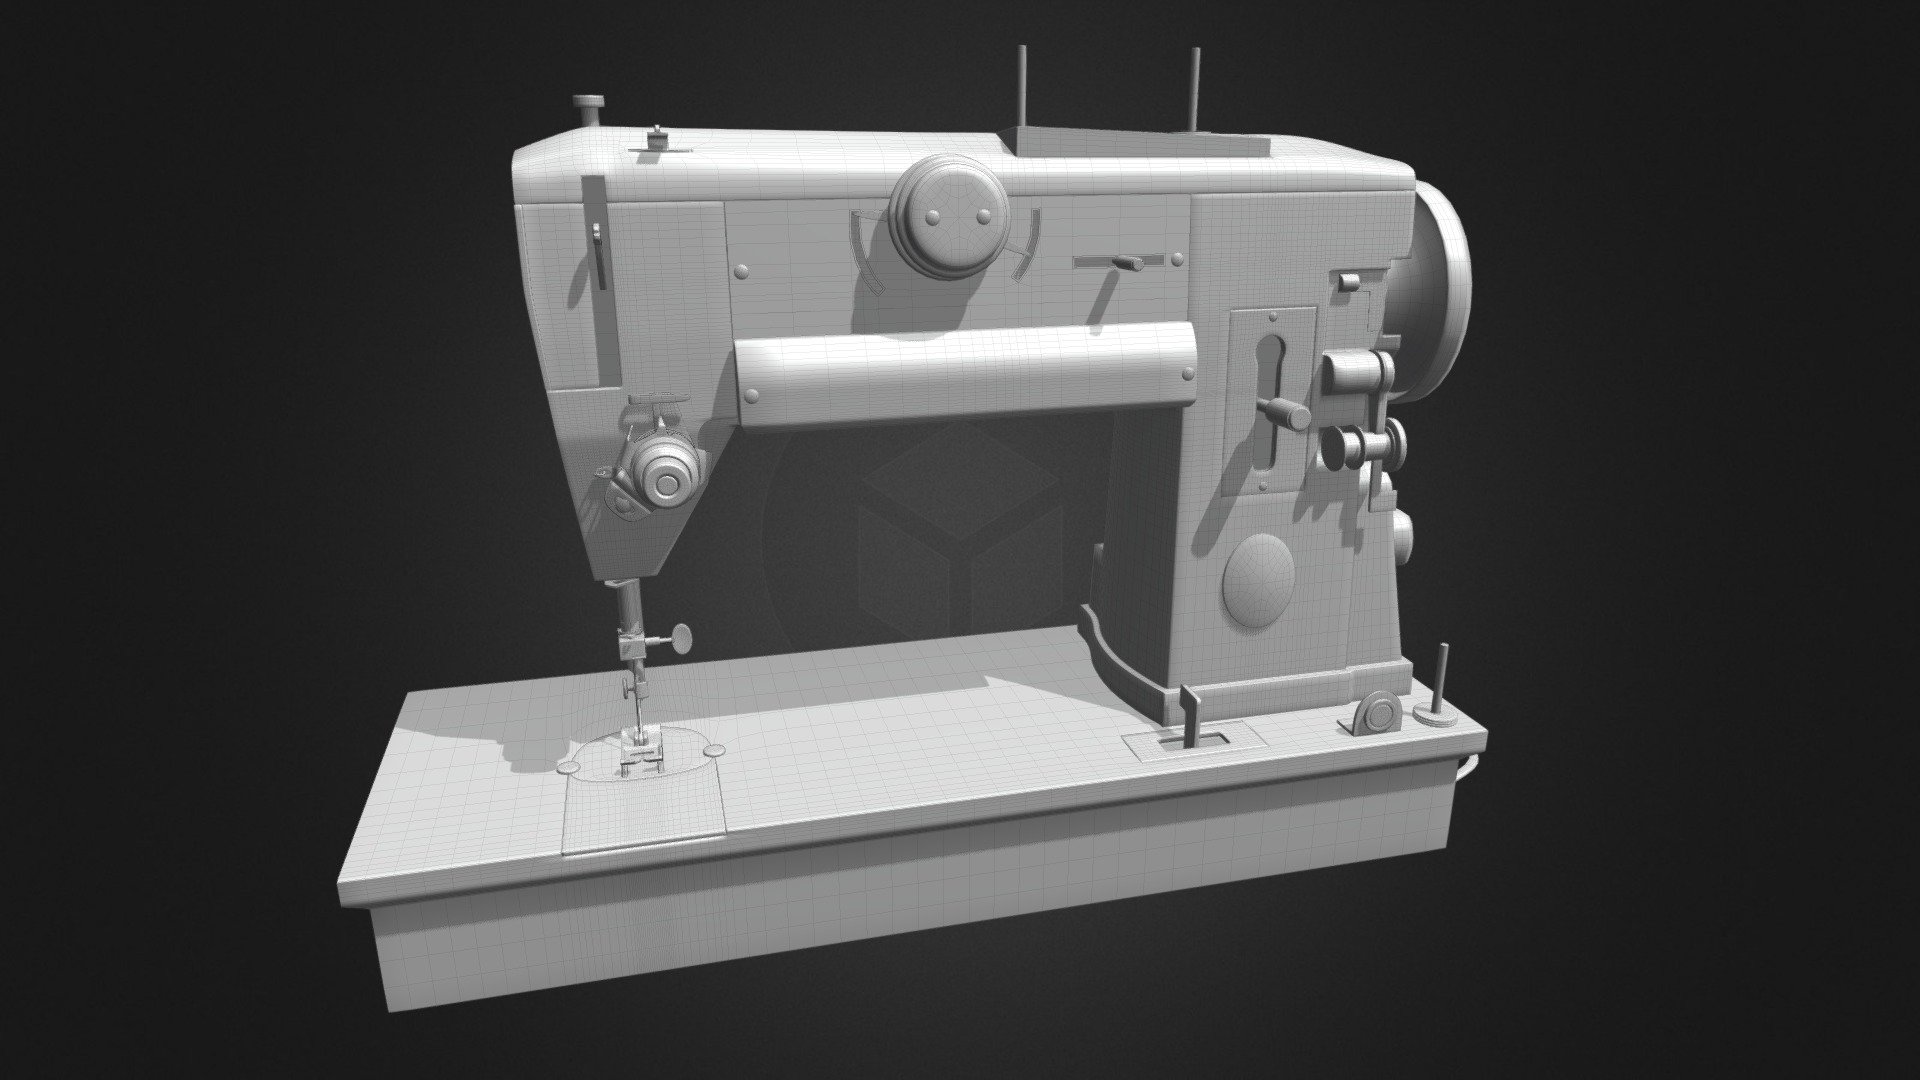 This is a sewing machine model, based on a 1958 Singer 401a model (though this was not meant to be an exact replica). It does not contain any modeling for the mechanical bits inside, because this model I have made as a nonmoving prop in a larger project I am currently working on. However, it does contain some flat planes inside so that you guys can fake an interior with some clever texturing. This model is without textures (there will be a textured version later on, once the larger project is completed in coming months). Texturing (in progress)  will be based on the Fallout 4 video game, mostly because I am playing that like crazy as of late, but also because I love Bethesda's style of texturing their assets. This is a mid-res version, which should be usable in most applications without much trouble 3d model